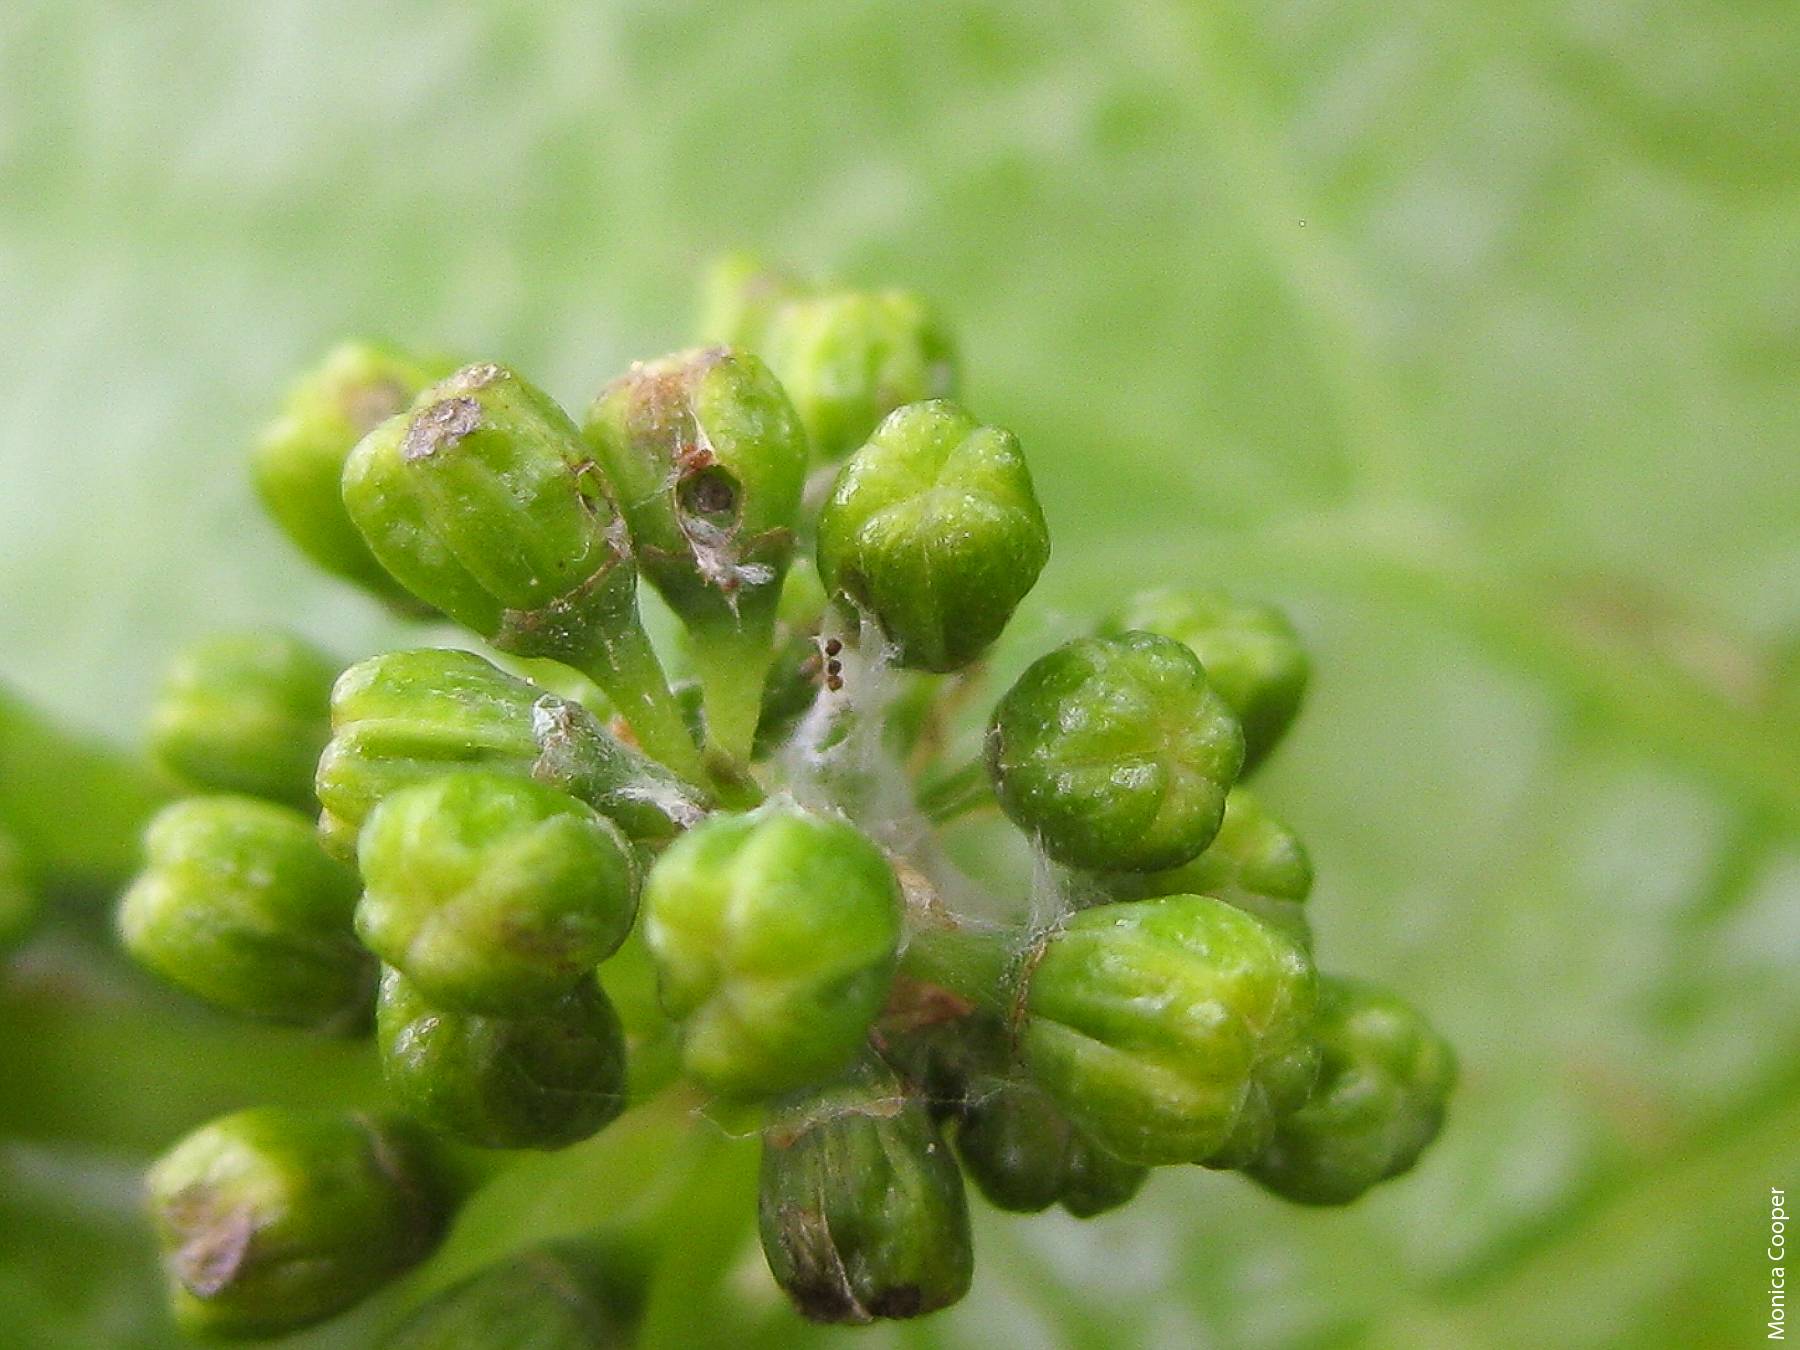 Feeding damage by European grapevine moth larva to a grape flower before bloom. Note the characteristic hole in the flower, webbing and larval excrement.